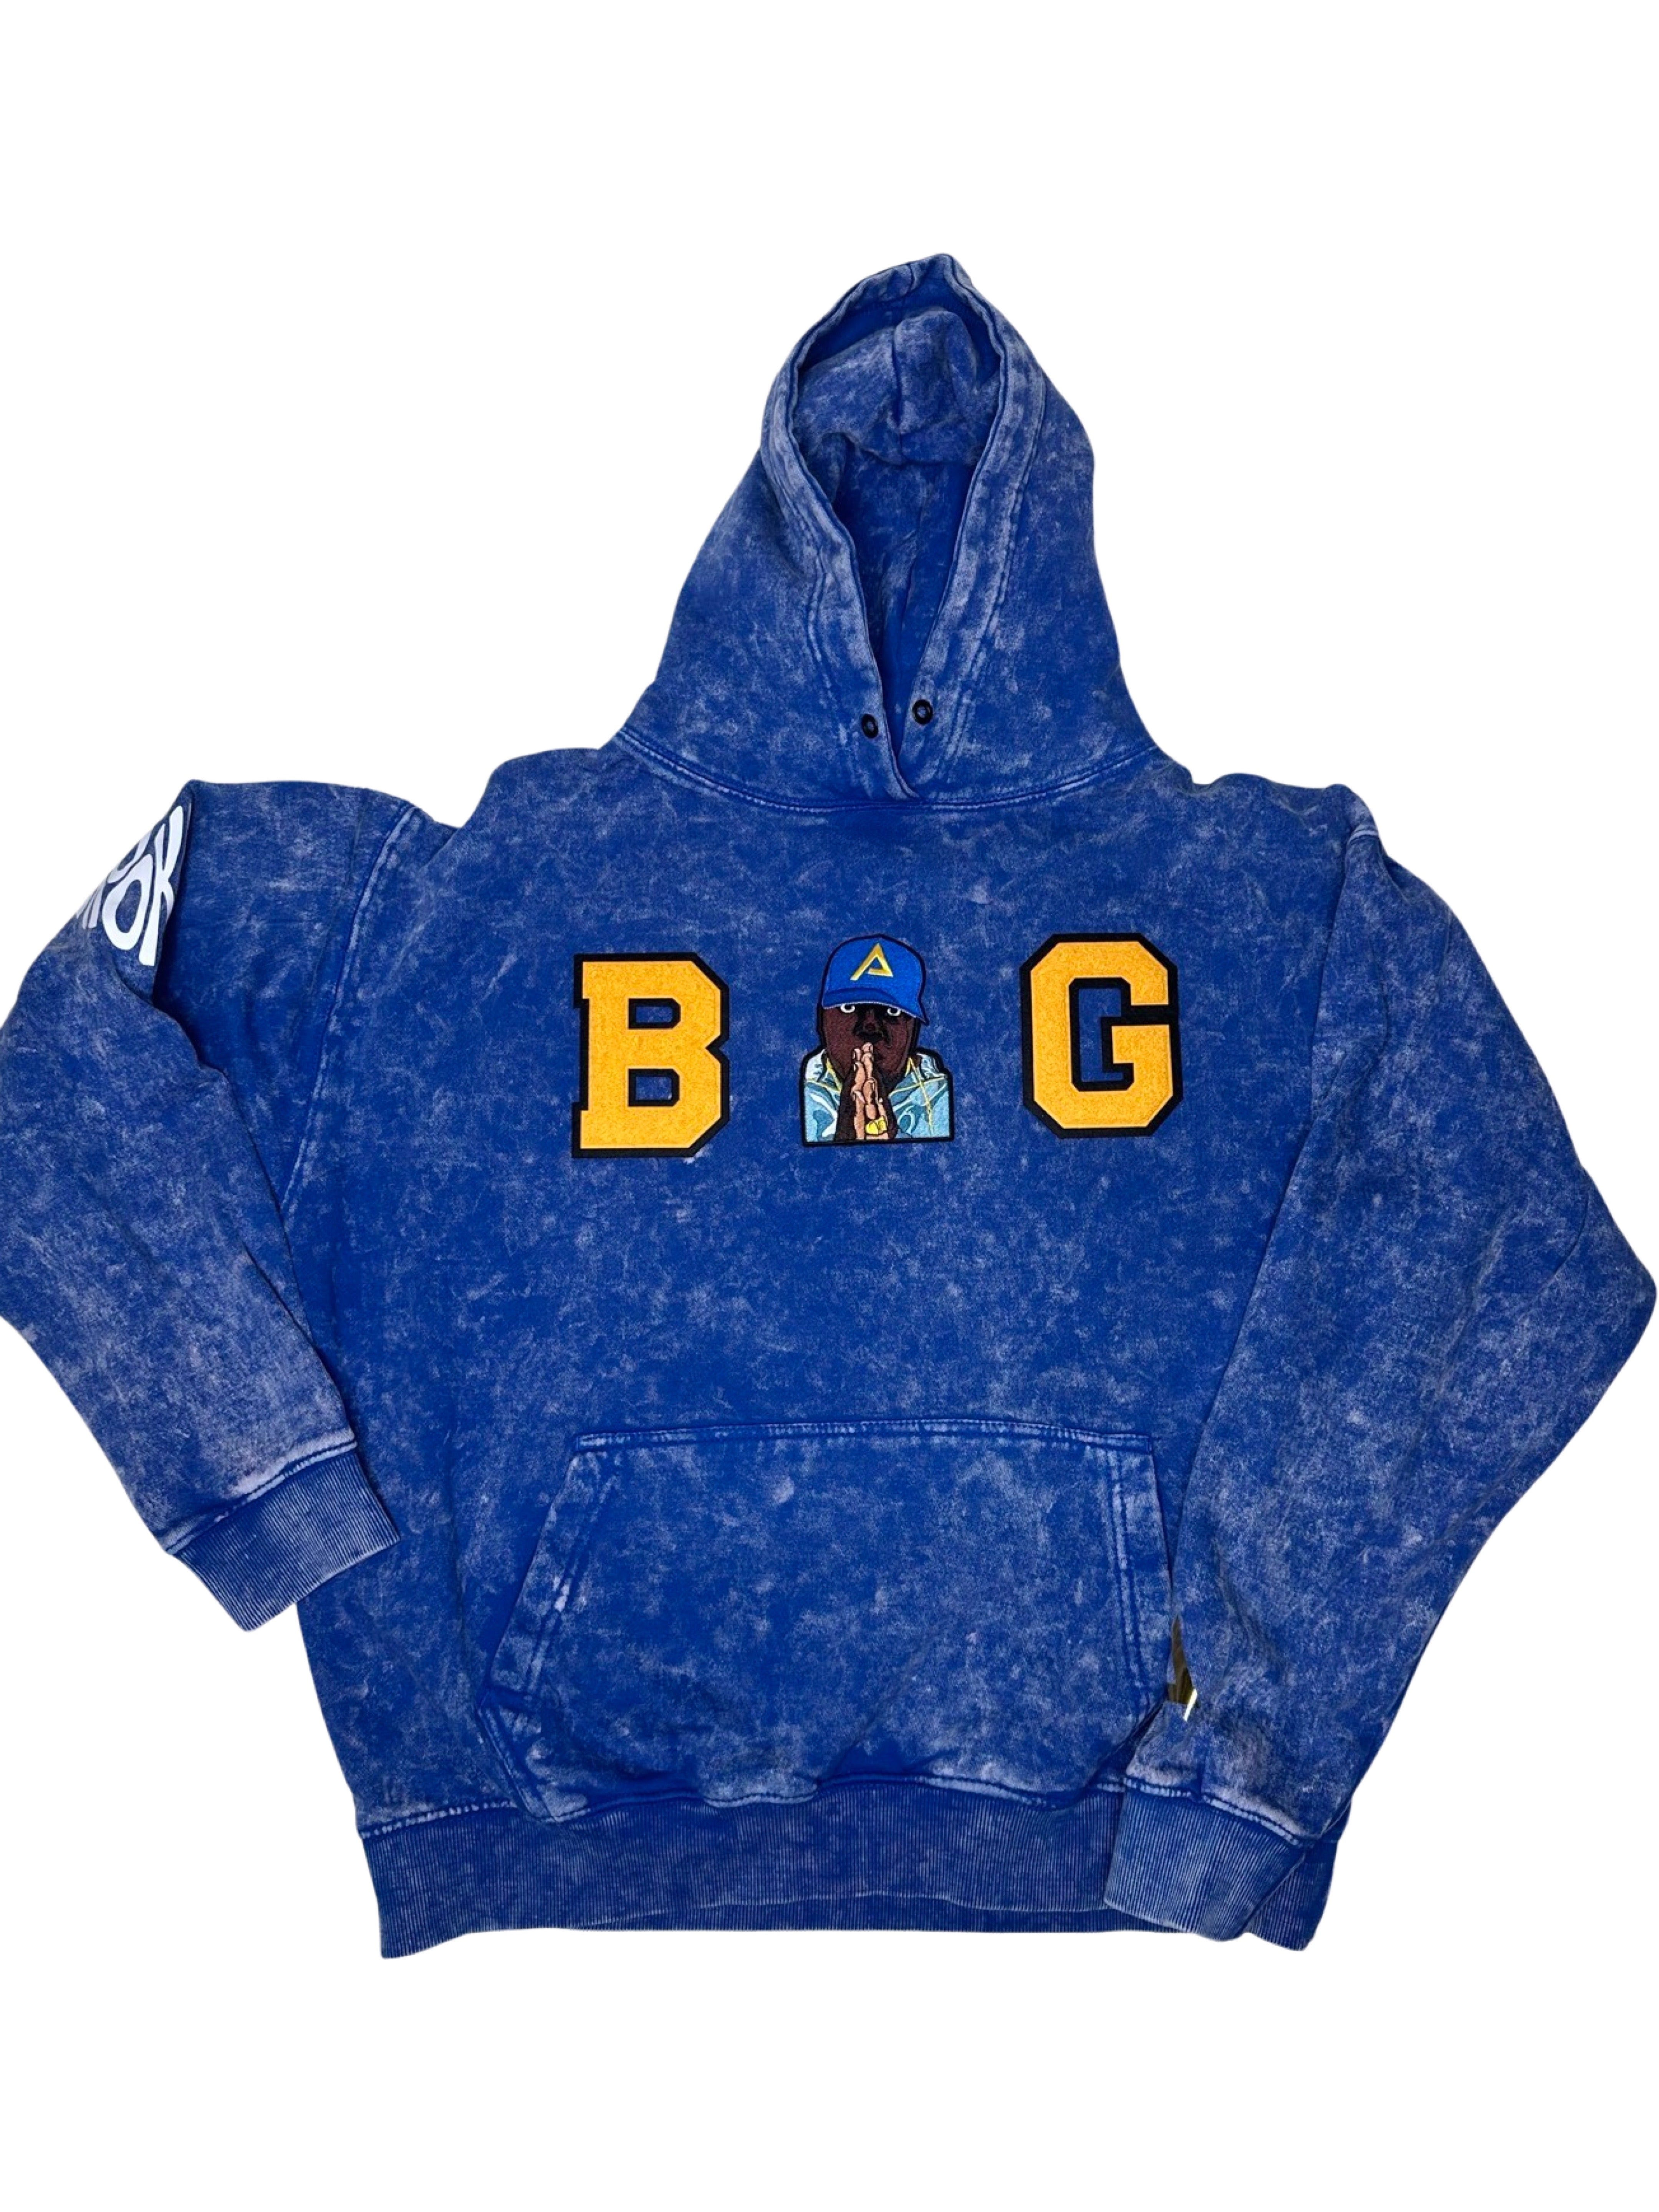 B.I.G ROYAL BLUE ASH WASHED AUTHORIZE HOODIE (LIMITED EDITION ONLY 24 MADE)